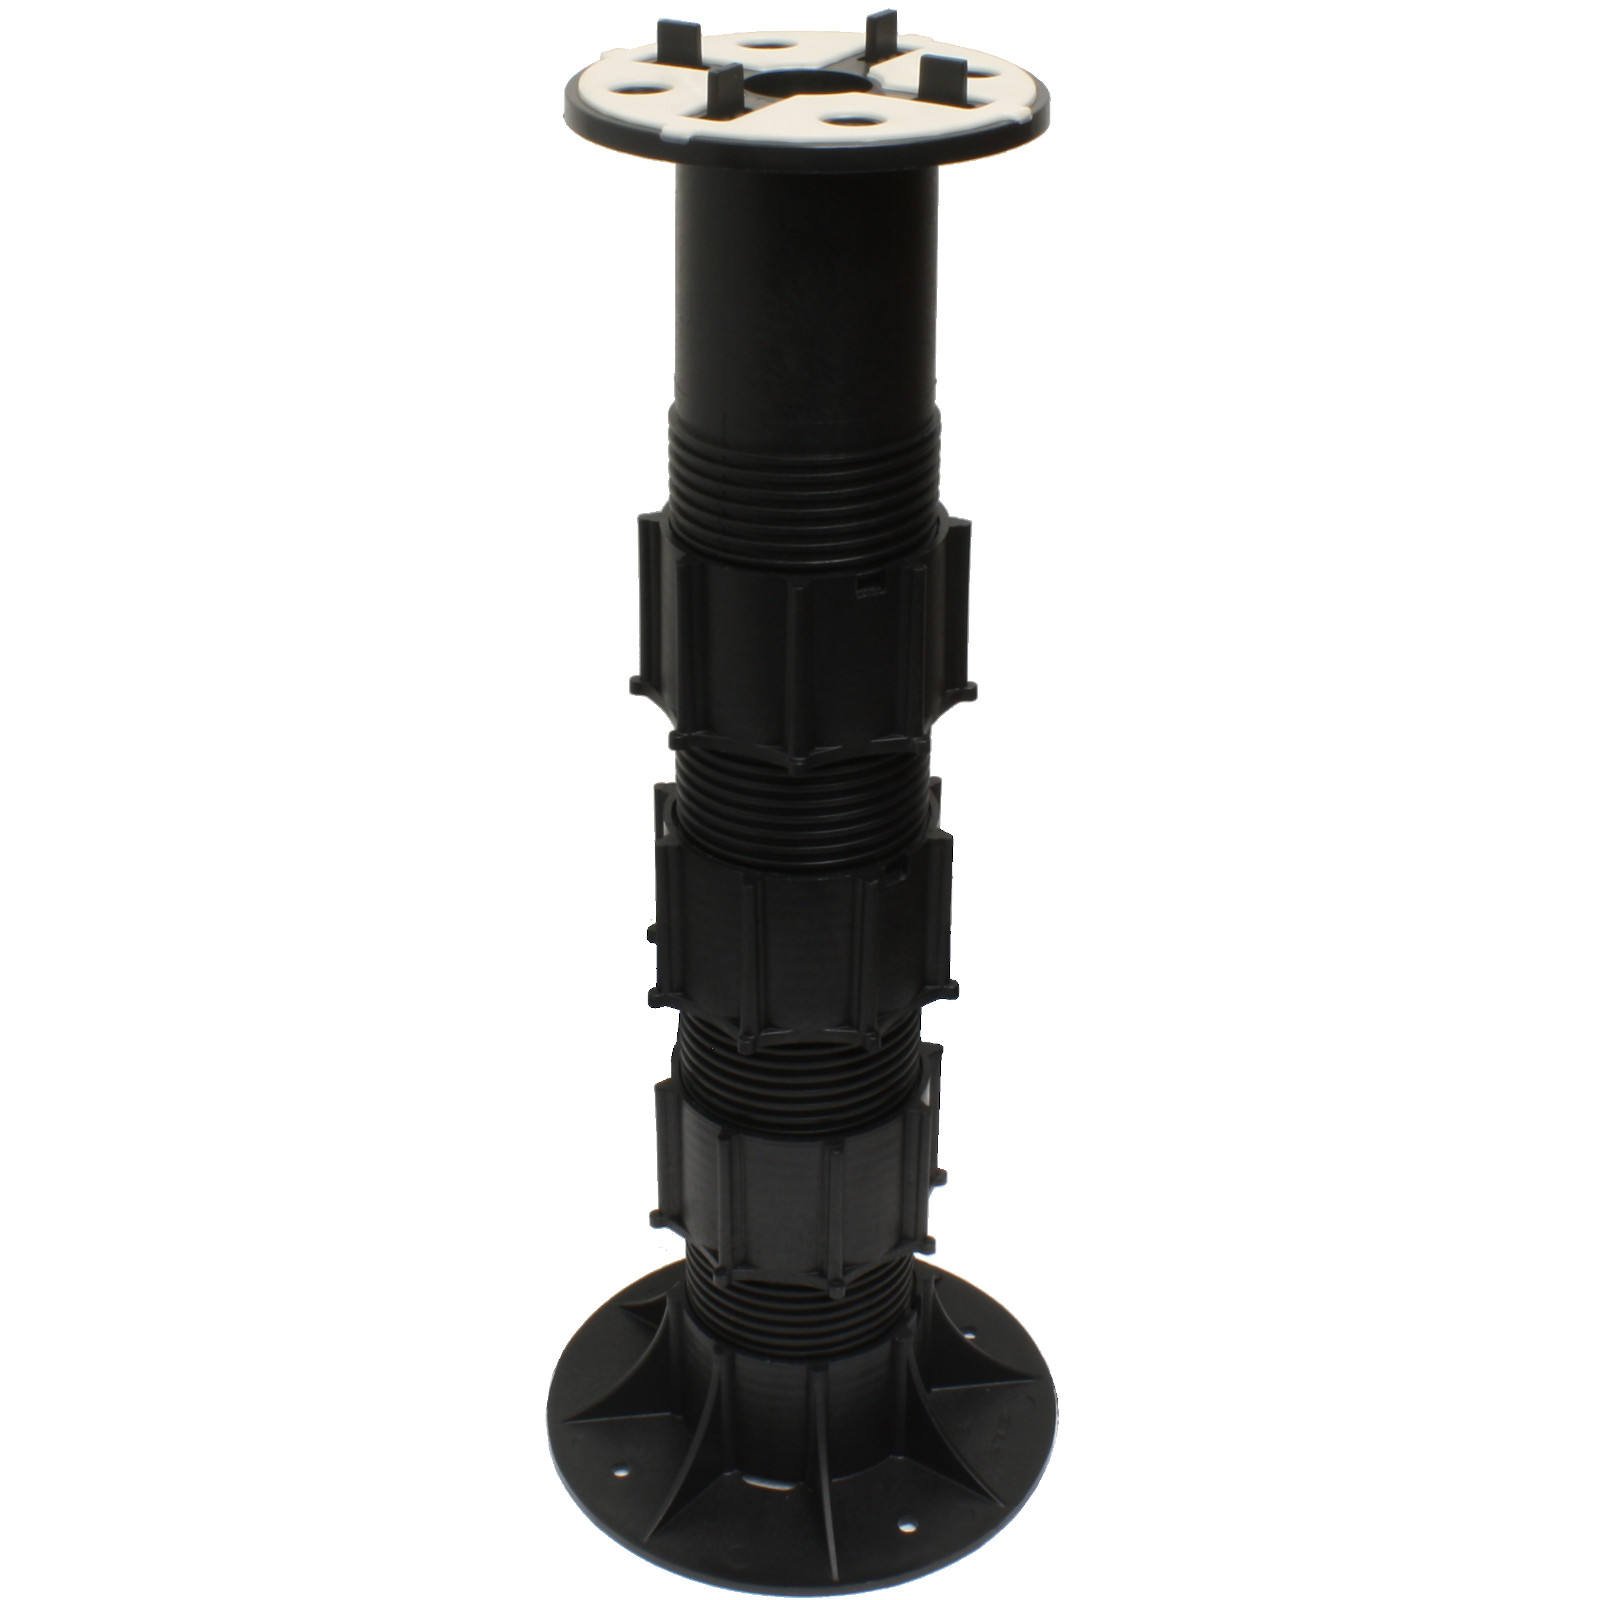 SE14 Adj Ped Support w/ Three-in-One Self Leveling Head 14.25” ‐ 21.75” (365‐550Mm)